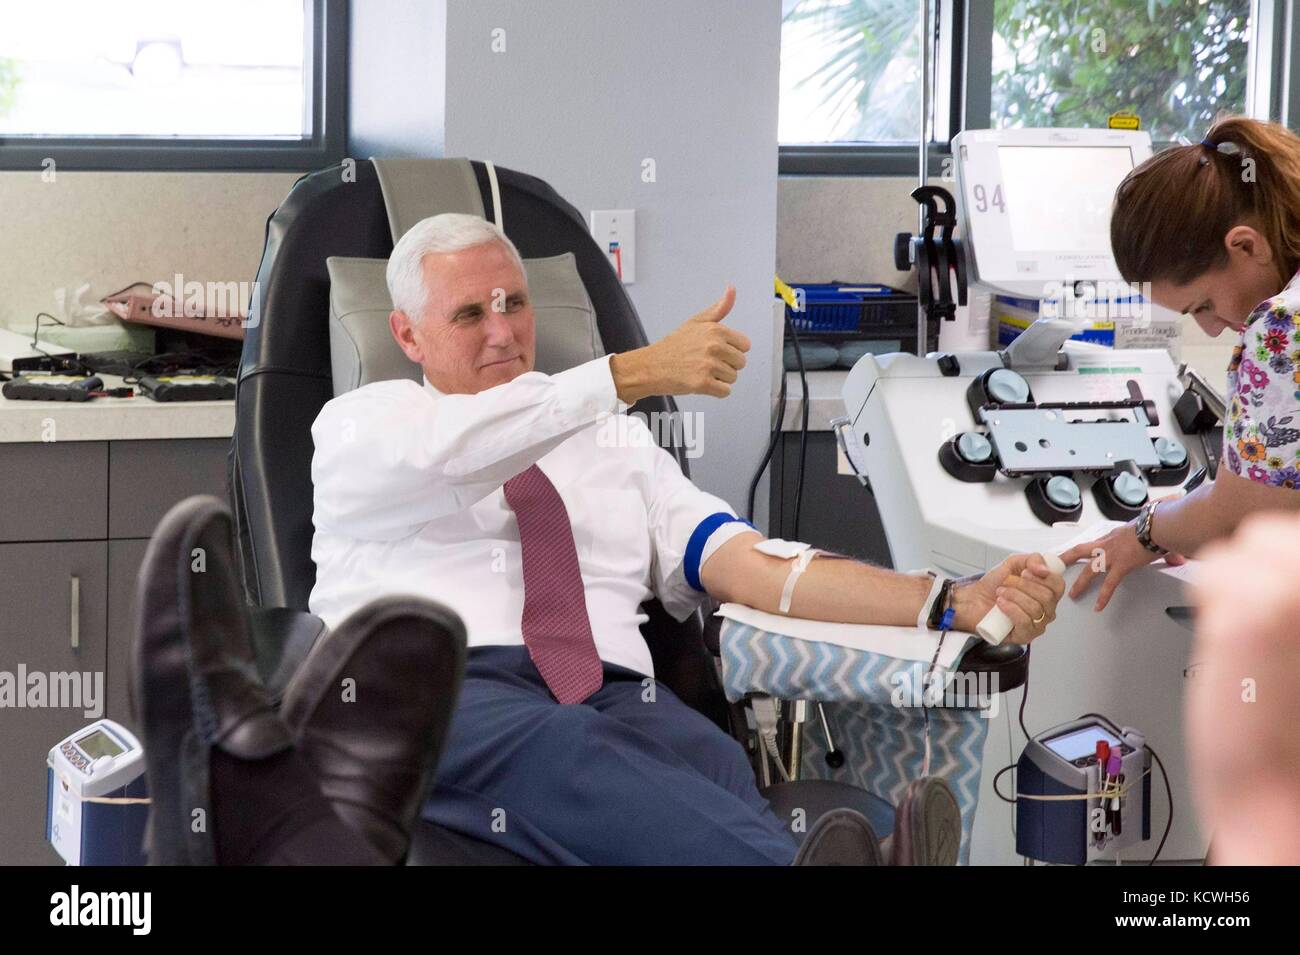 U.S. Vice President Mike Pence gives a thumbs up as he donates blood for the victims of the mass shooting in Las Vegas at the United Blood Services blood donation center October 4, 2017 in Phoenix, Arizona. Stock Photo